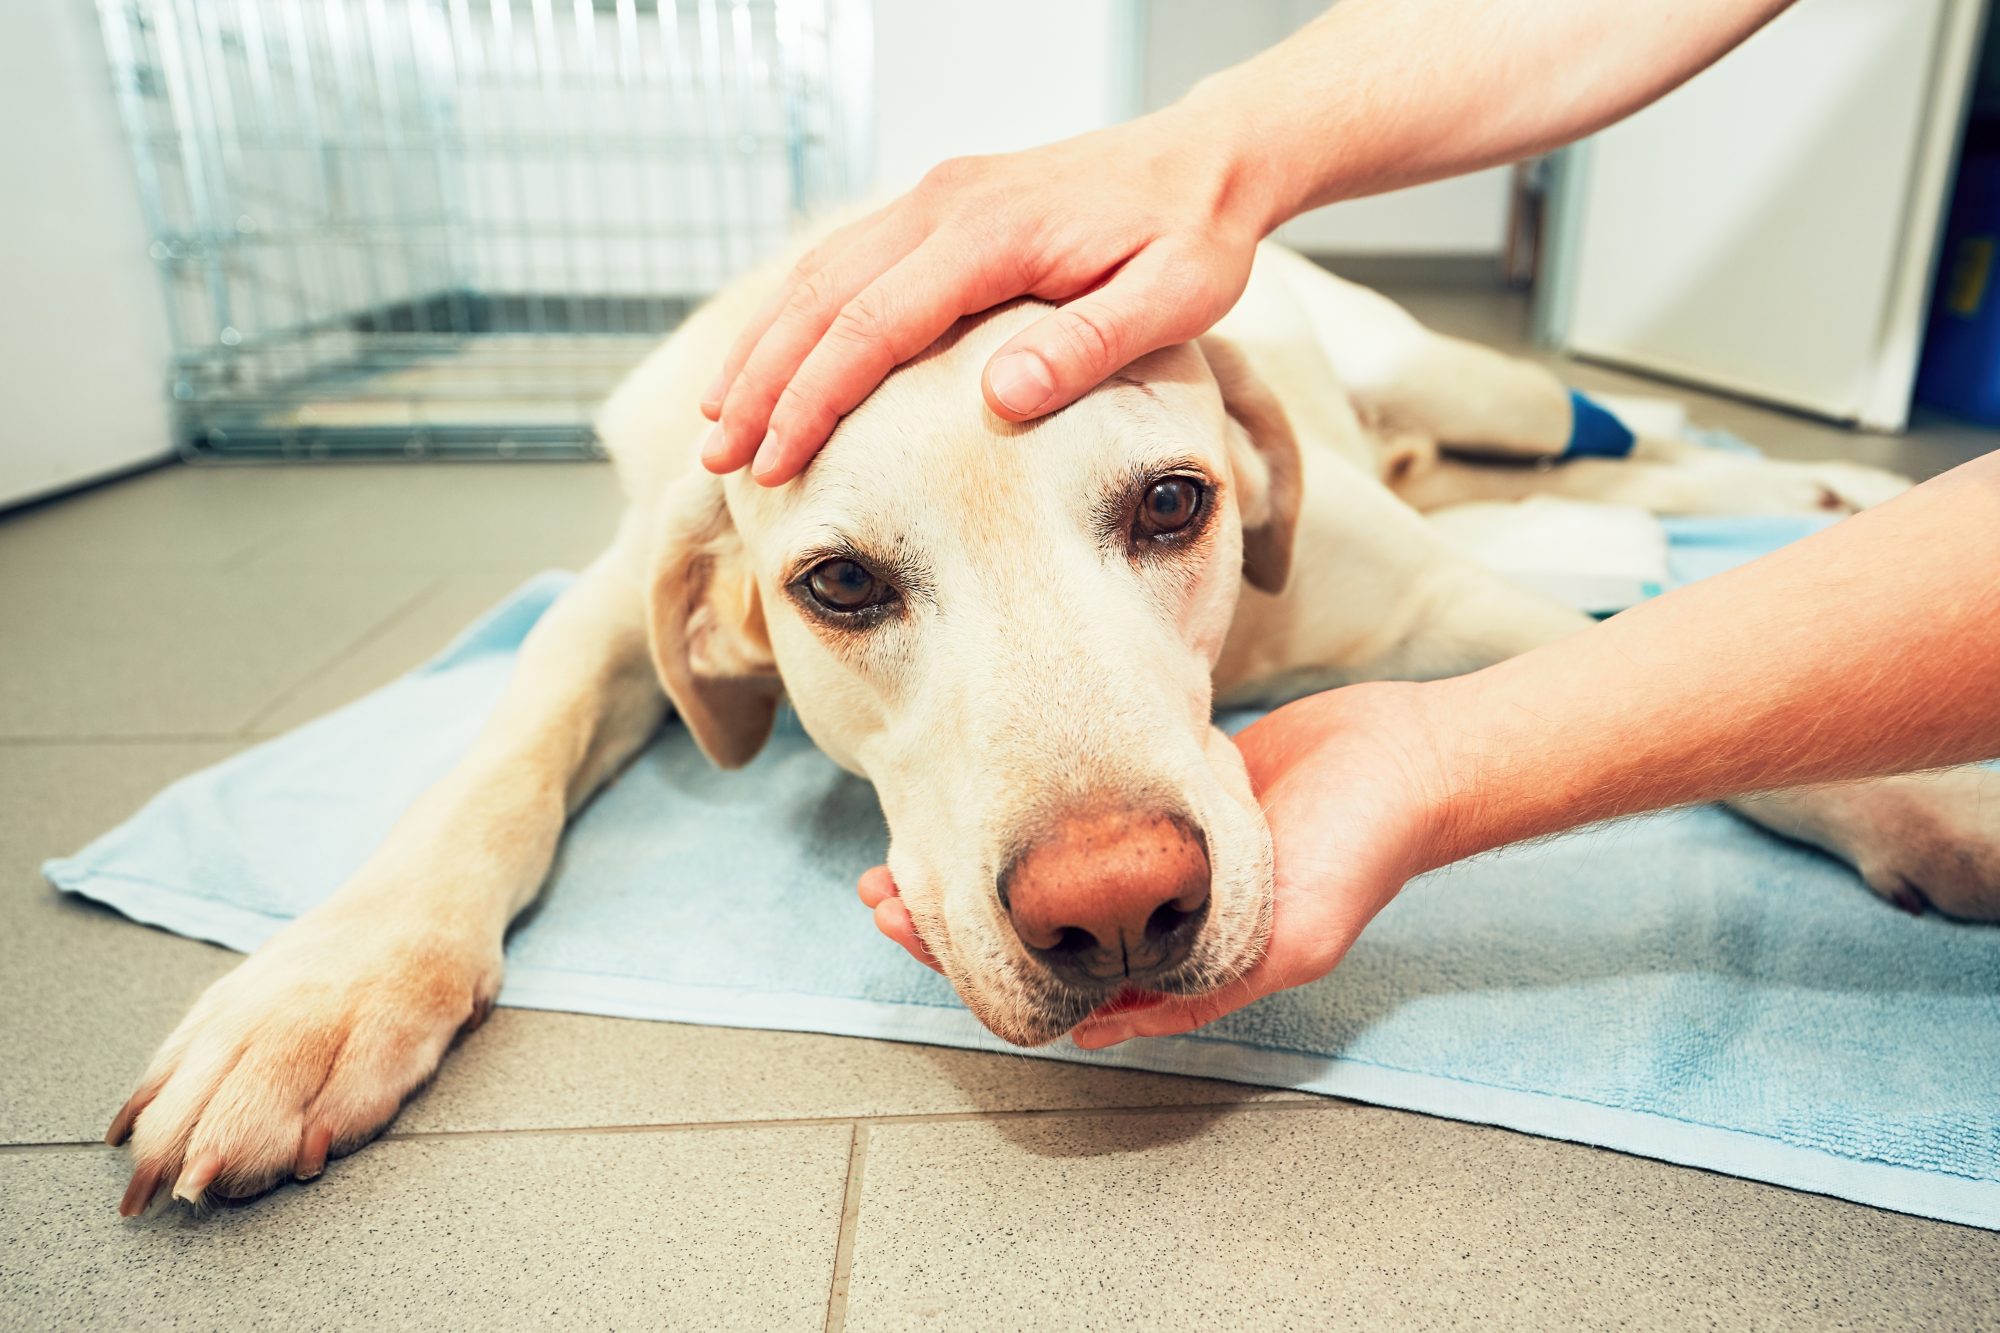 How do you stop a dog from having seizures?